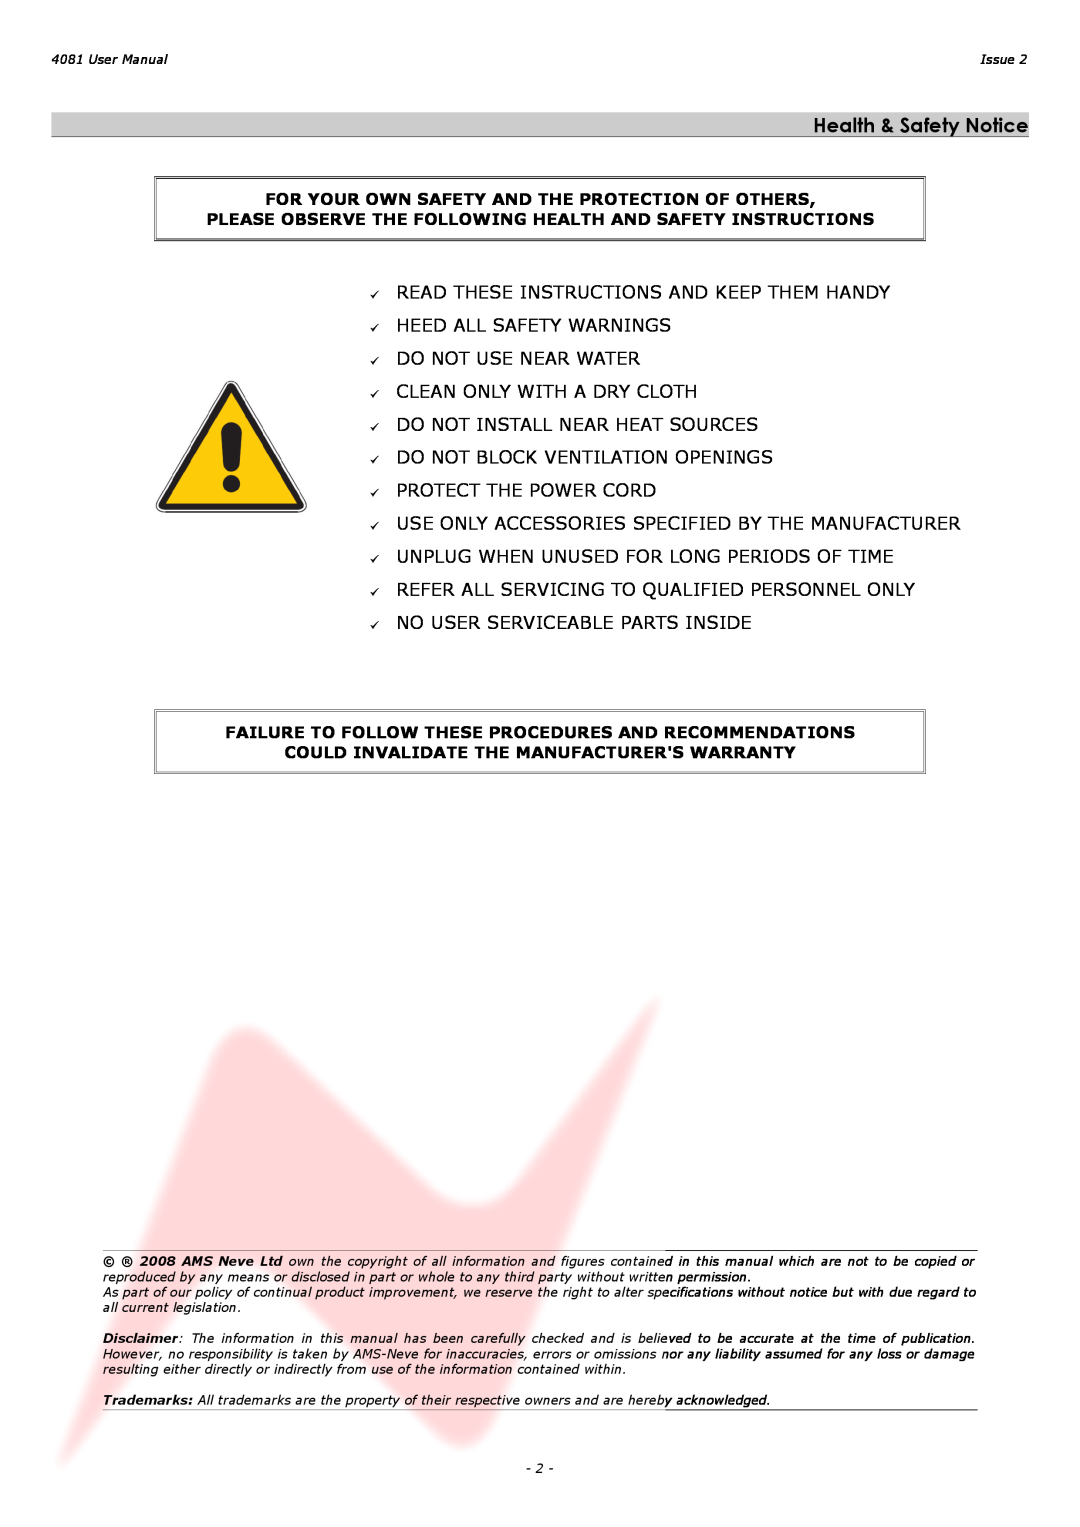 AMS 4081 user manual Health & Safety Notice 